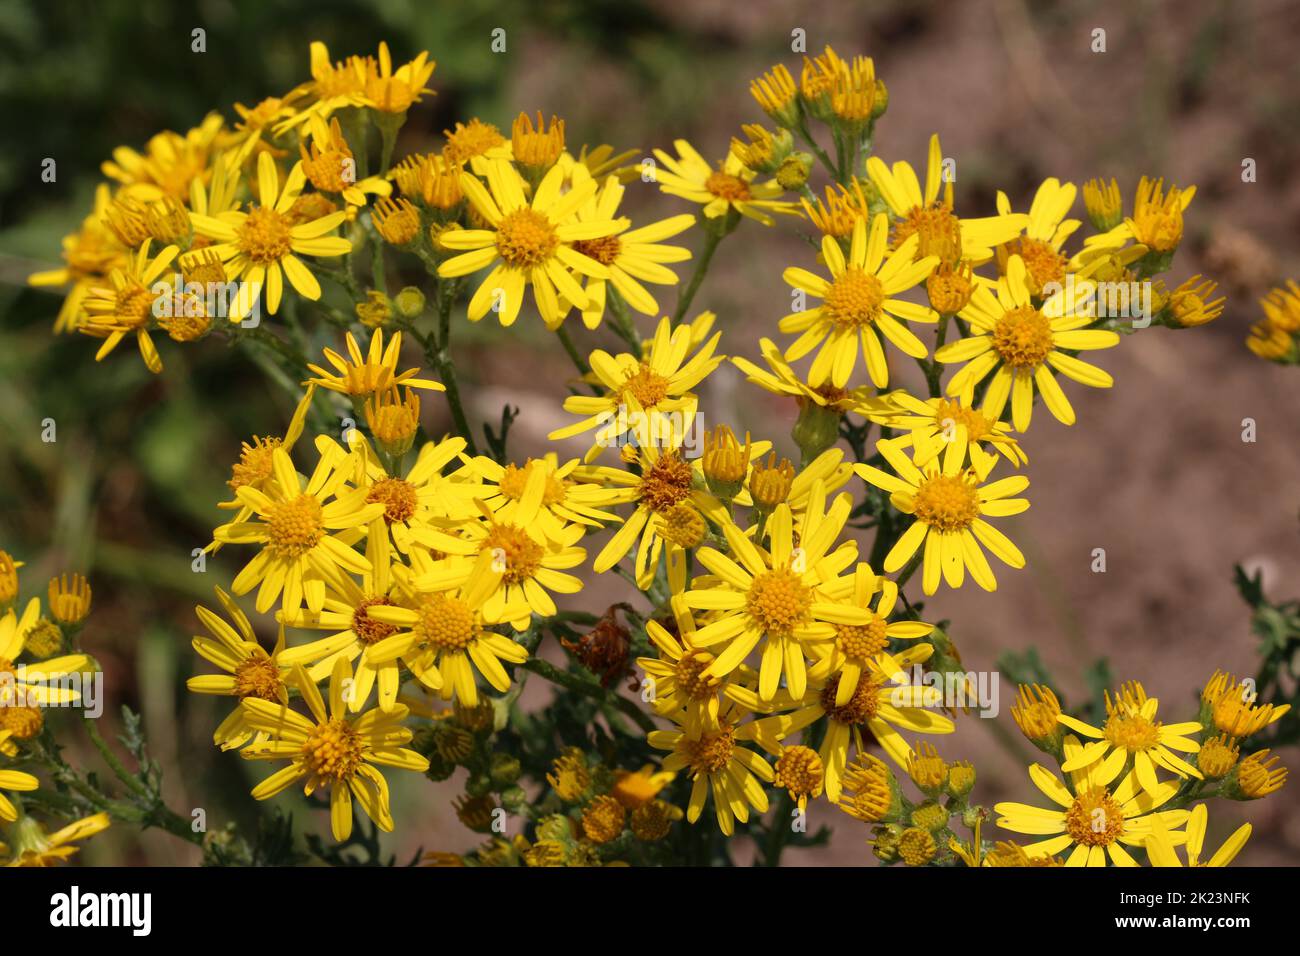 Yellow ragwort, Senecio jacobaea, flowers in close up with a blurred background of leaves. Stock Photo